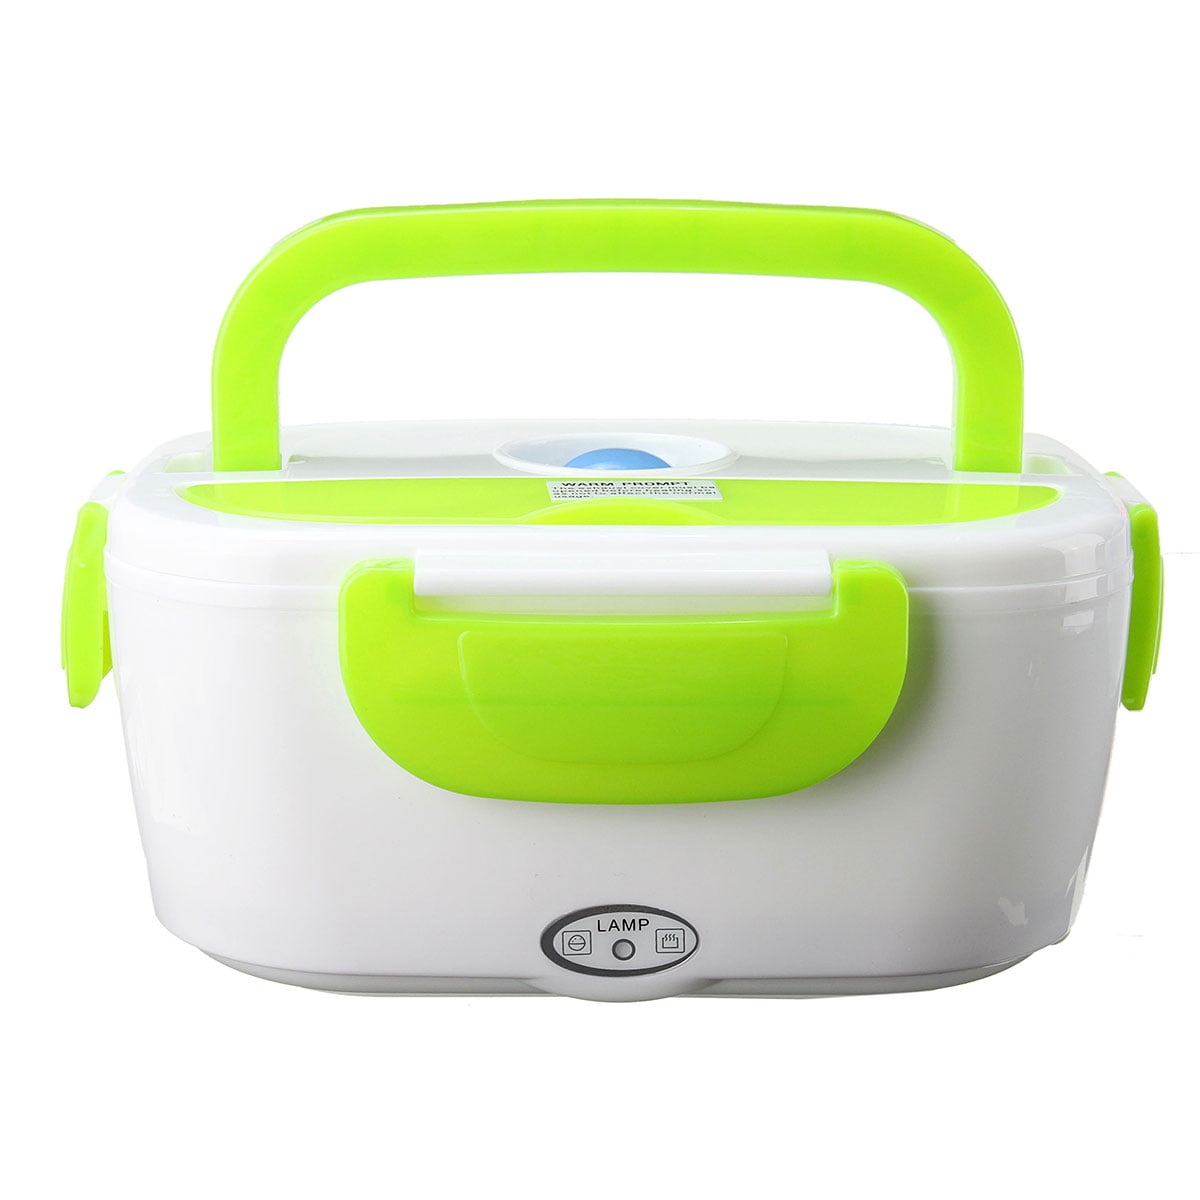 5-Gear Portable Electric Heating Lunch Box Food Warmer Container for Work  Schopv